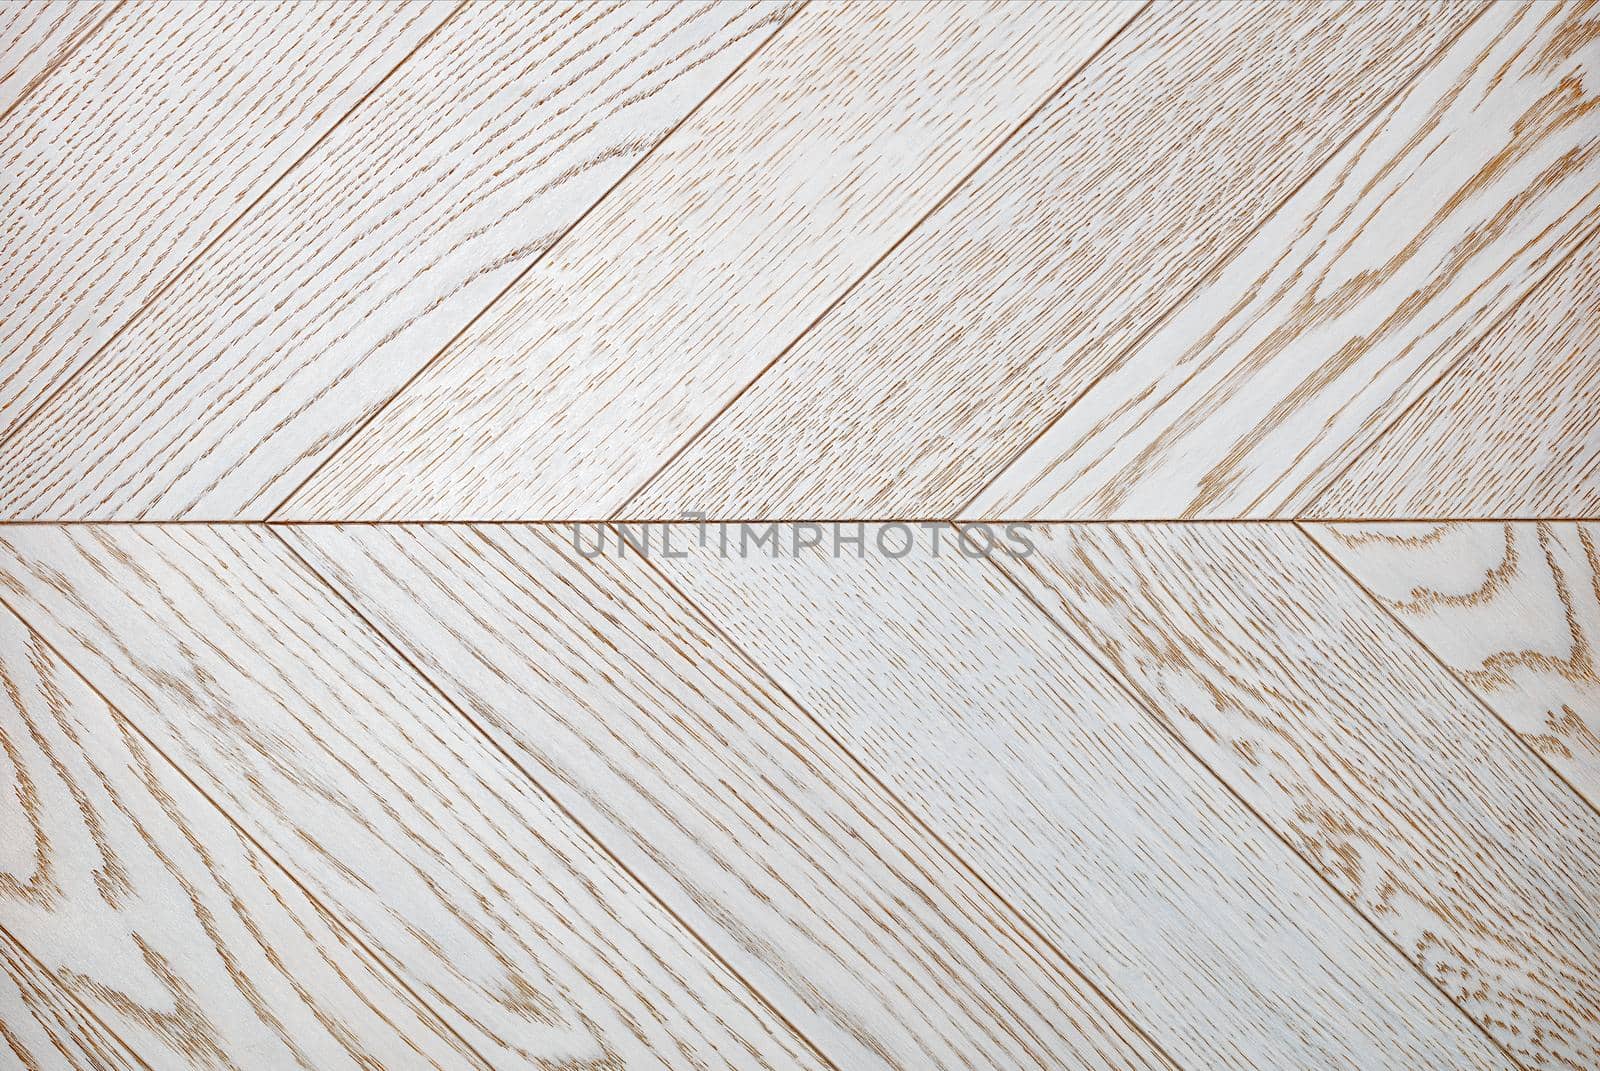 Wooden light planks with a bright texture in white, arranged symmetrically opposite each other in a herringbone shape.